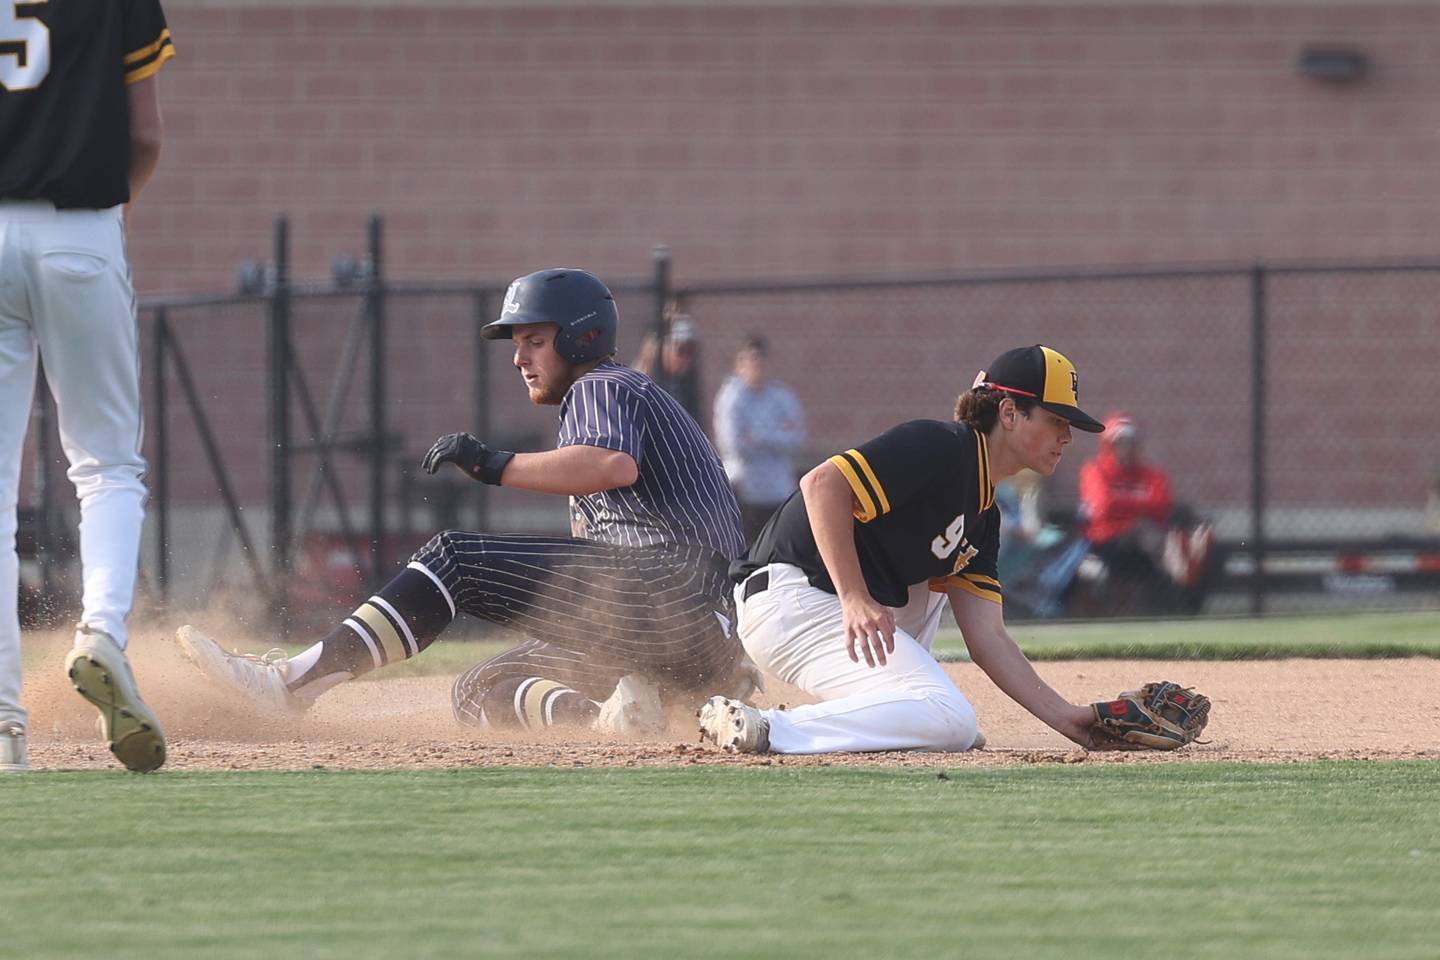 Lemont’s Pat Gardner slides into third ahead of the throw against Hinsdale South on Wednesday, May 24, 2023, in Lemont.